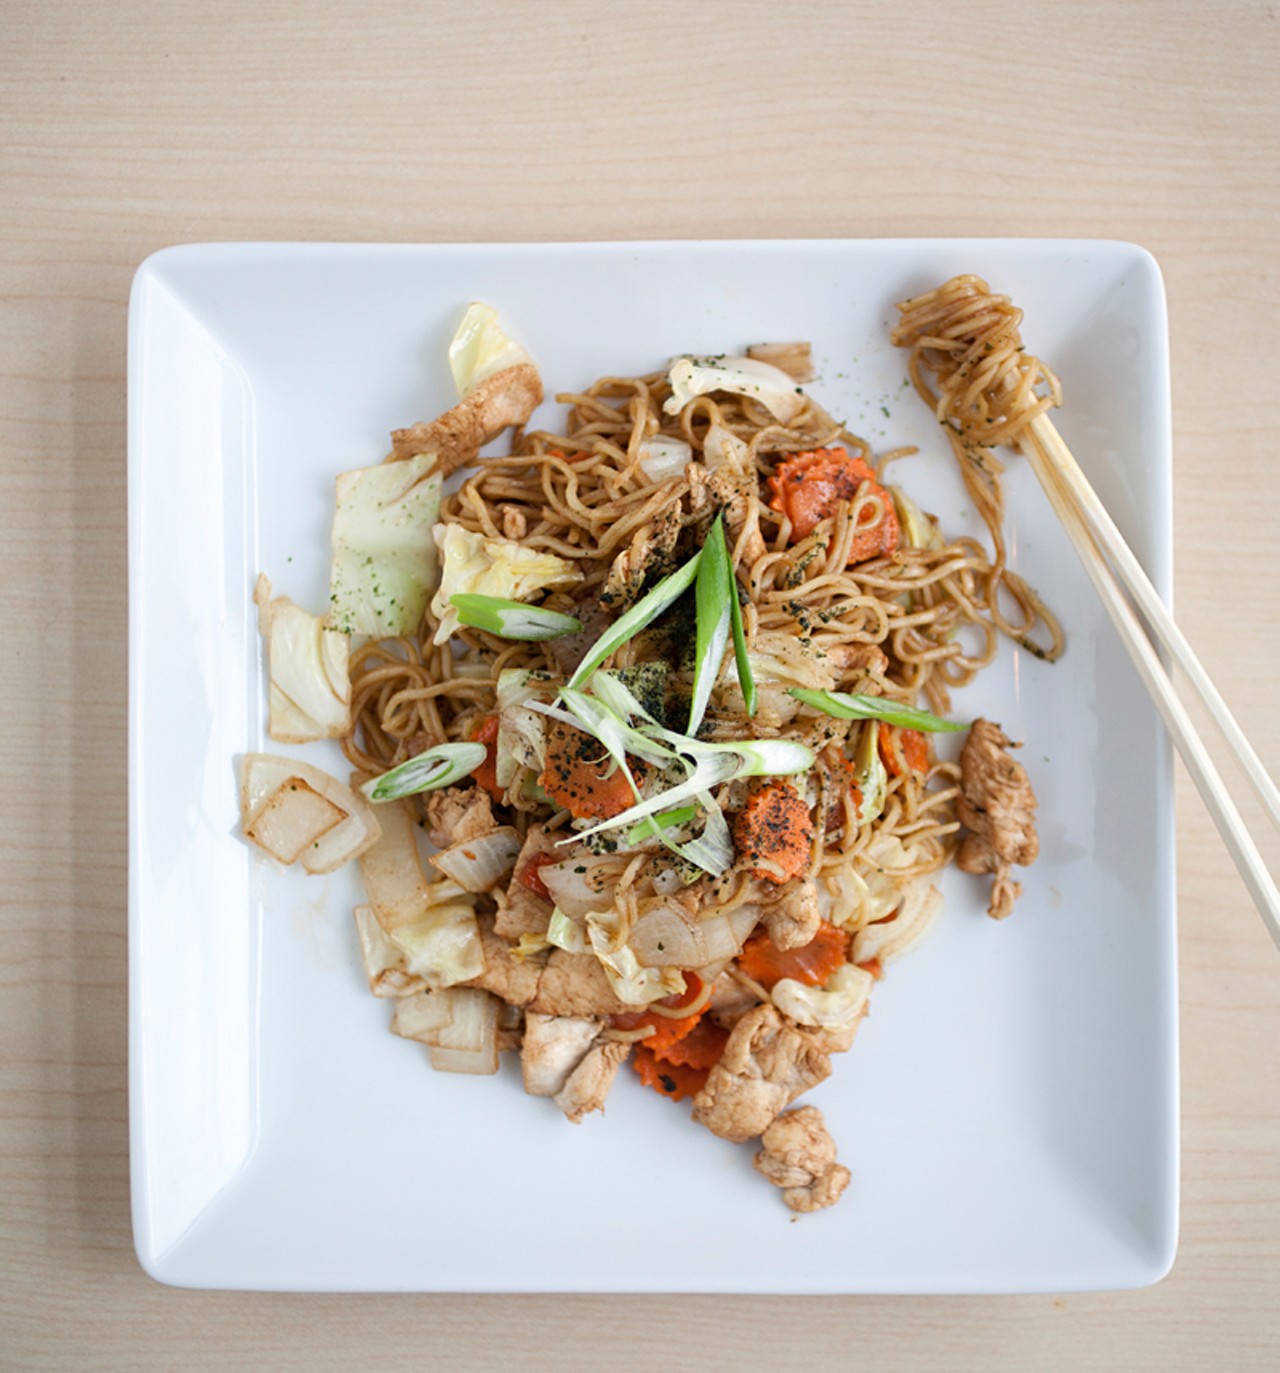 Yakisoba with chicken (you can also choose pork, shrimp, beef or vegetarian versions). This stir fry dish is Japanese egg noodles with cabbage, carrots and onions in Yakisoba sauce.